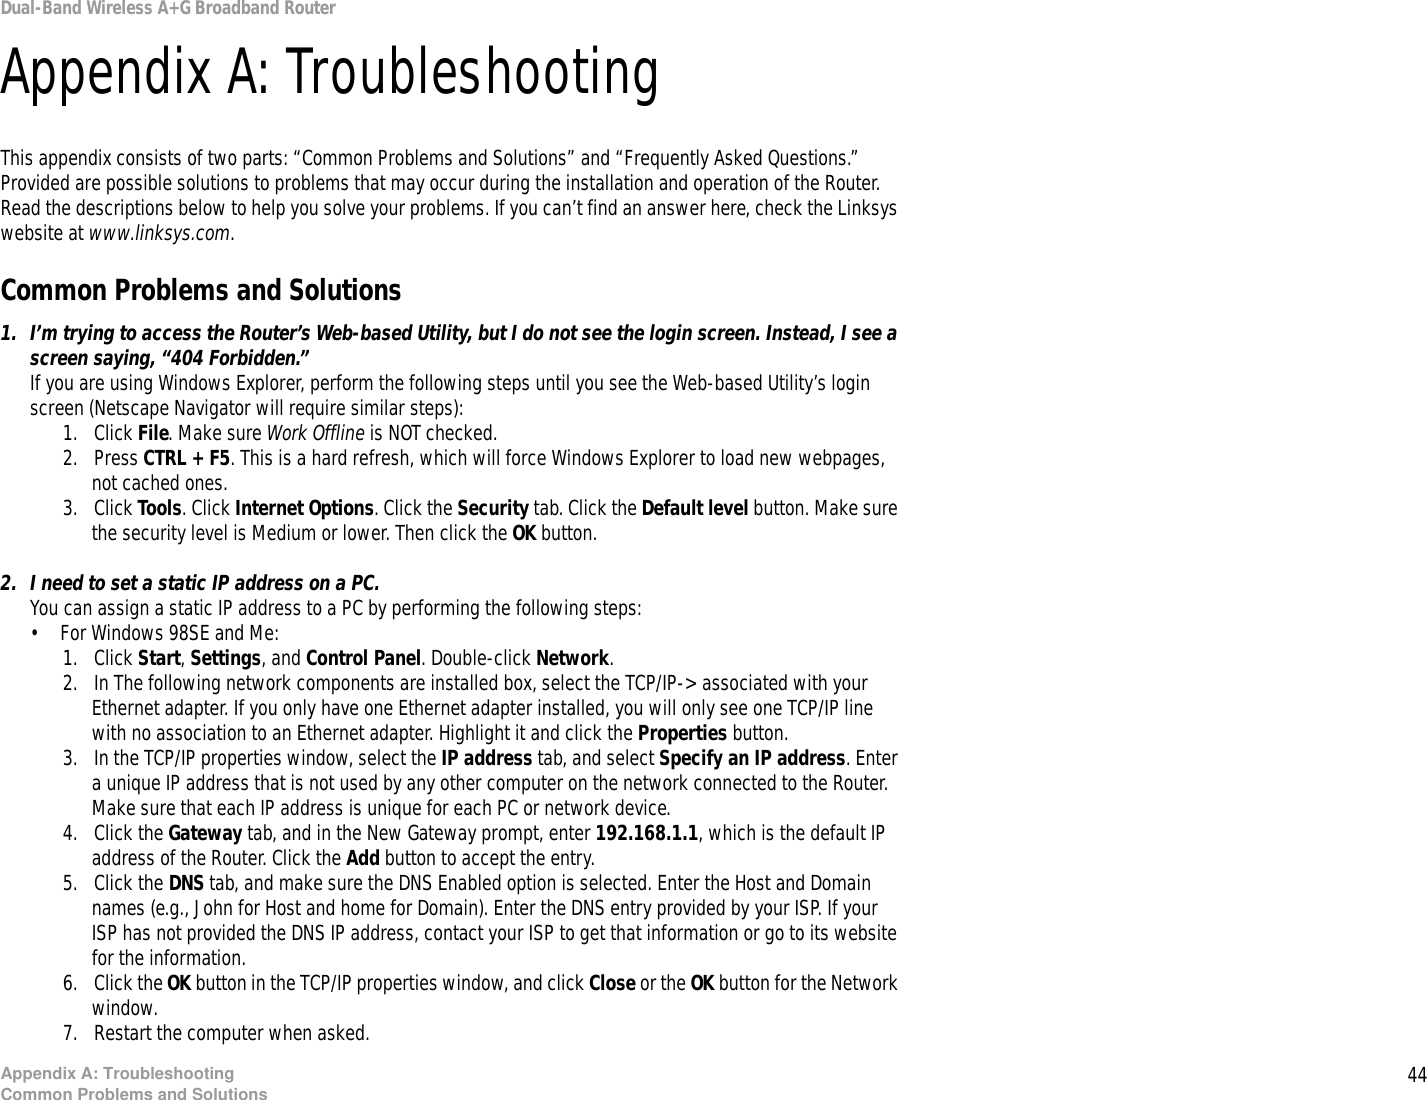 44Appendix A: TroubleshootingCommon Problems and SolutionsDual-Band Wireless A+G Broadband RouterAppendix A: TroubleshootingThis appendix consists of two parts: “Common Problems and Solutions” and “Frequently Asked Questions.” Provided are possible solutions to problems that may occur during the installation and operation of the Router. Read the descriptions below to help you solve your problems. If you can’t find an answer here, check the Linksys website at www.linksys.com.Common Problems and Solutions1. I’m trying to access the Router’s Web-based Utility, but I do not see the login screen. Instead, I see a screen saying, “404 Forbidden.”If you are using Windows Explorer, perform the following steps until you see the Web-based Utility’s login screen (Netscape Navigator will require similar steps):1. Click File. Make sure Work Offline is NOT checked.2. Press CTRL + F5. This is a hard refresh, which will force Windows Explorer to load new webpages, not cached ones.3. Click Tools. Click Internet Options. Click the Security tab. Click the Default level button. Make sure the security level is Medium or lower. Then click the OK button.2. I need to set a static IP address on a PC.You can assign a static IP address to a PC by performing the following steps:• For Windows 98SE and Me:1. Click Start, Settings, and Control Panel. Double-click Network.2. In The following network components are installed box, select the TCP/IP-&gt; associated with your Ethernet adapter. If you only have one Ethernet adapter installed, you will only see one TCP/IP line with no association to an Ethernet adapter. Highlight it and click the Properties button.3. In the TCP/IP properties window, select the IP address tab, and select Specify an IP address. Enter a unique IP address that is not used by any other computer on the network connected to the Router. Make sure that each IP address is unique for each PC or network device.4. Click the Gateway tab, and in the New Gateway prompt, enter 192.168.1.1, which is the default IP address of the Router. Click the Add button to accept the entry.5. Click the DNS tab, and make sure the DNS Enabled option is selected. Enter the Host and Domain names (e.g., John for Host and home for Domain). Enter the DNS entry provided by your ISP. If your ISP has not provided the DNS IP address, contact your ISP to get that information or go to its website for the information.6. Click the OK button in the TCP/IP properties window, and click Close or the OK button for the Network window.7. Restart the computer when asked.